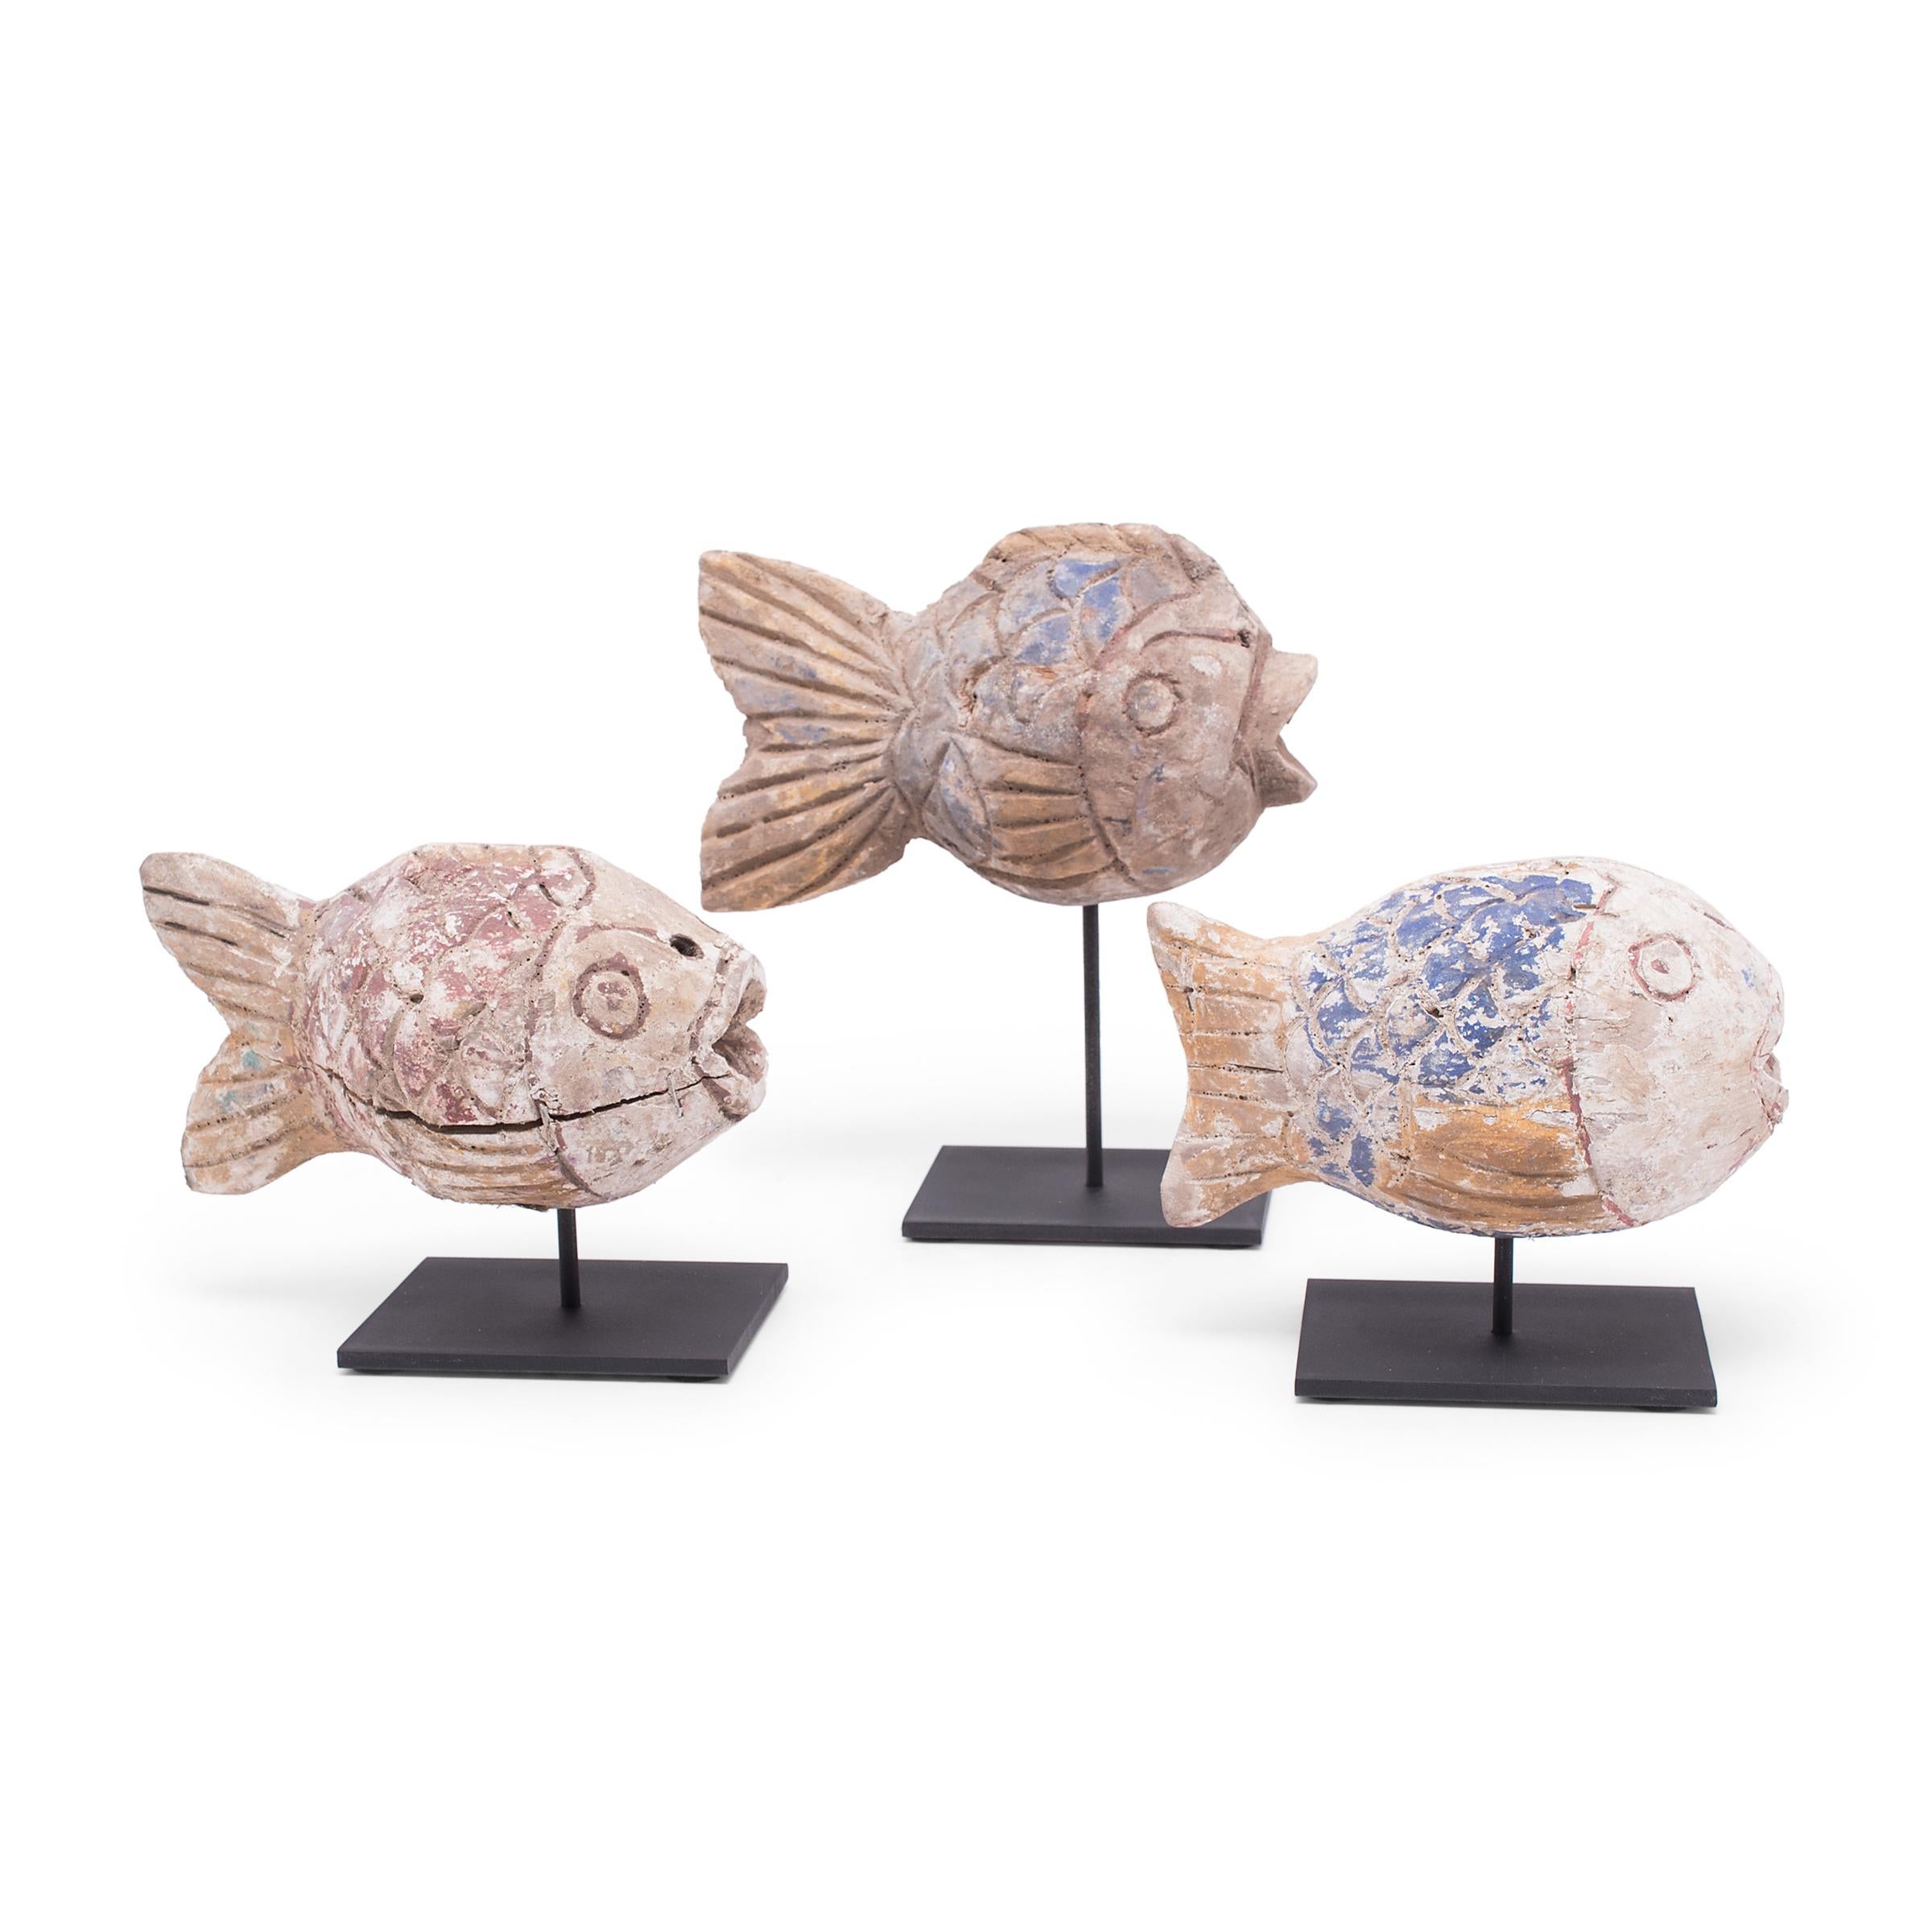 Hand-carved from reclaimed wood, these rustic fish sculptures recreate early 20th-century Chinese folk art designs. Each fish is painted with colorful pigments and finished with a beautifully worn texture. Common motifs in Chinese art, fish are